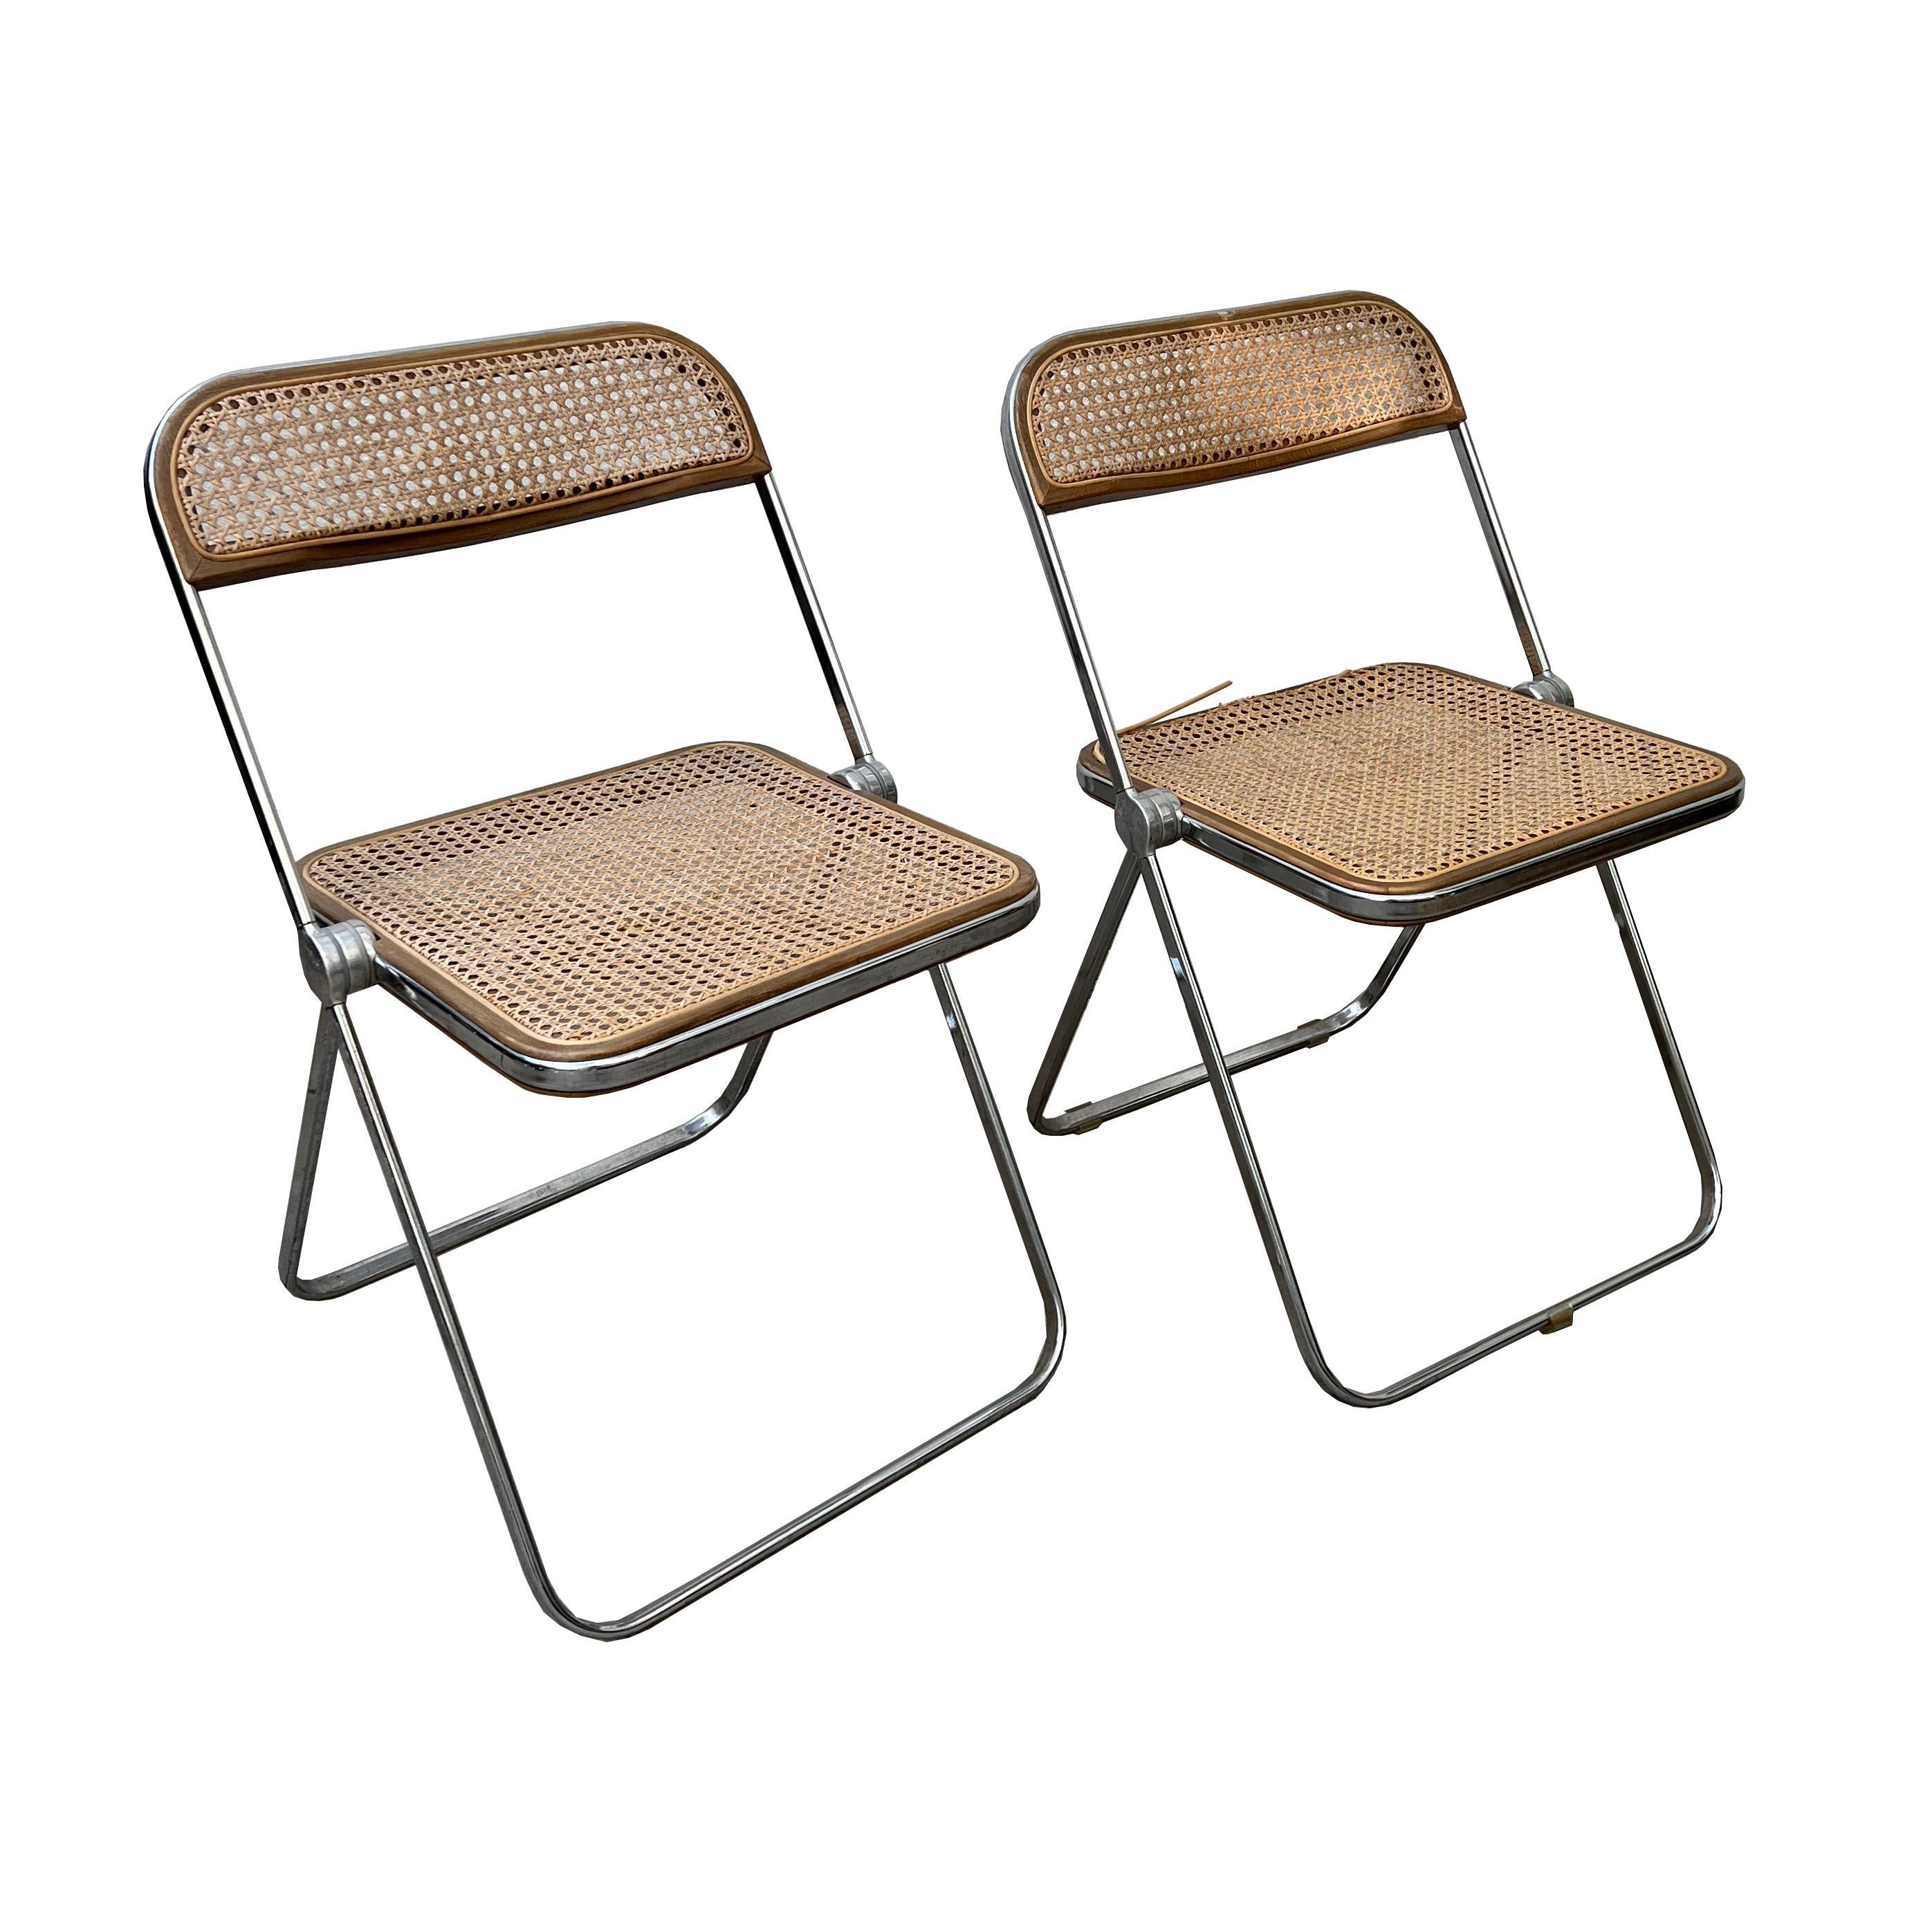 Design classic Giancarlo Piretti for Castelli Plia chair with rare woven wicker and walnut on chromed base. With the Plia chair, the designer, Giancarlo Piretti, revolutionized the concept of the folding chair. The combination of steel and